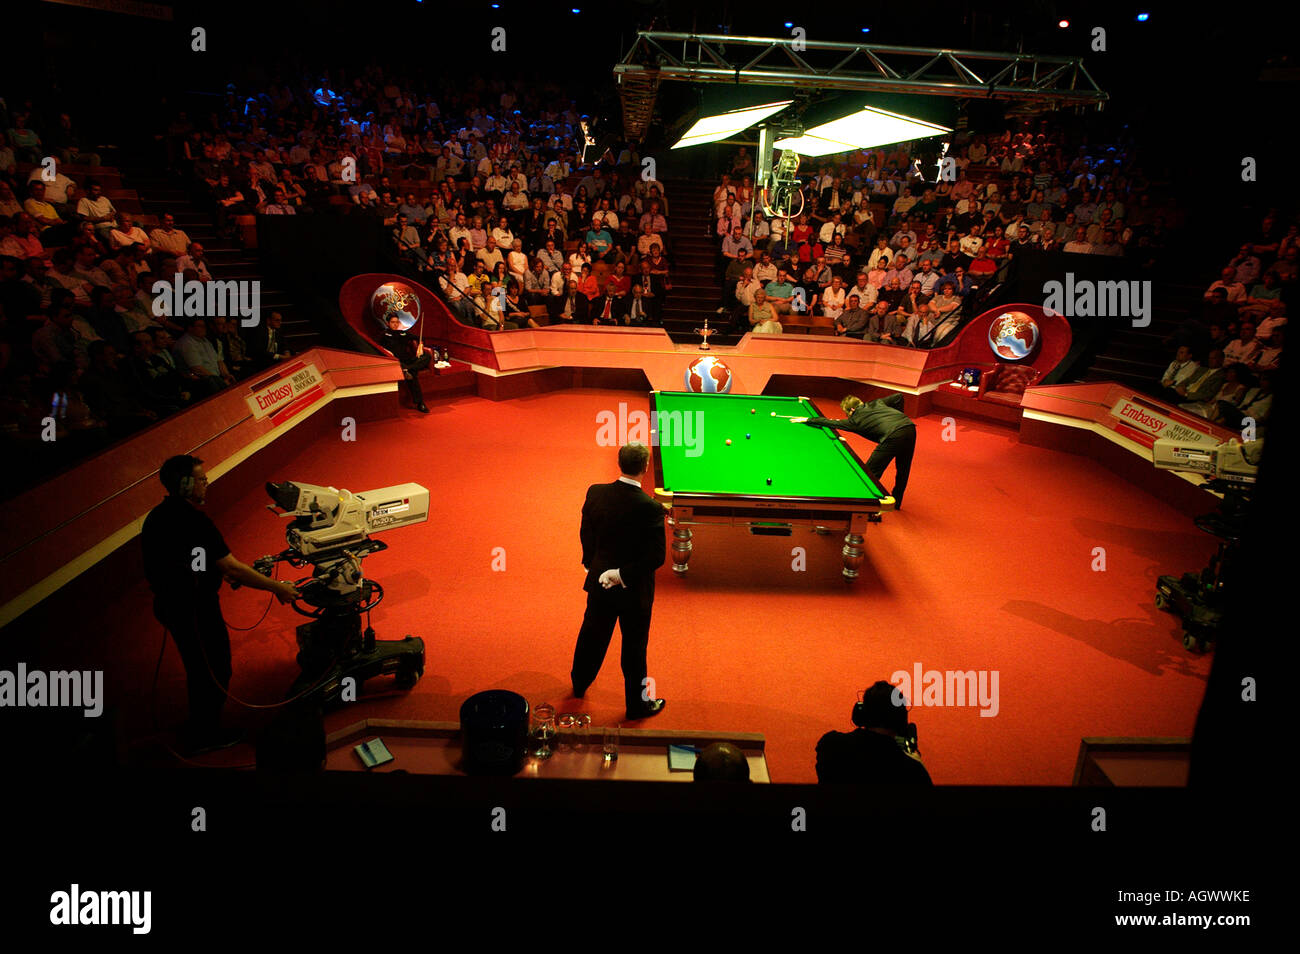 The Crucible Theatre, during The World Snooker Championships final Stock Photo